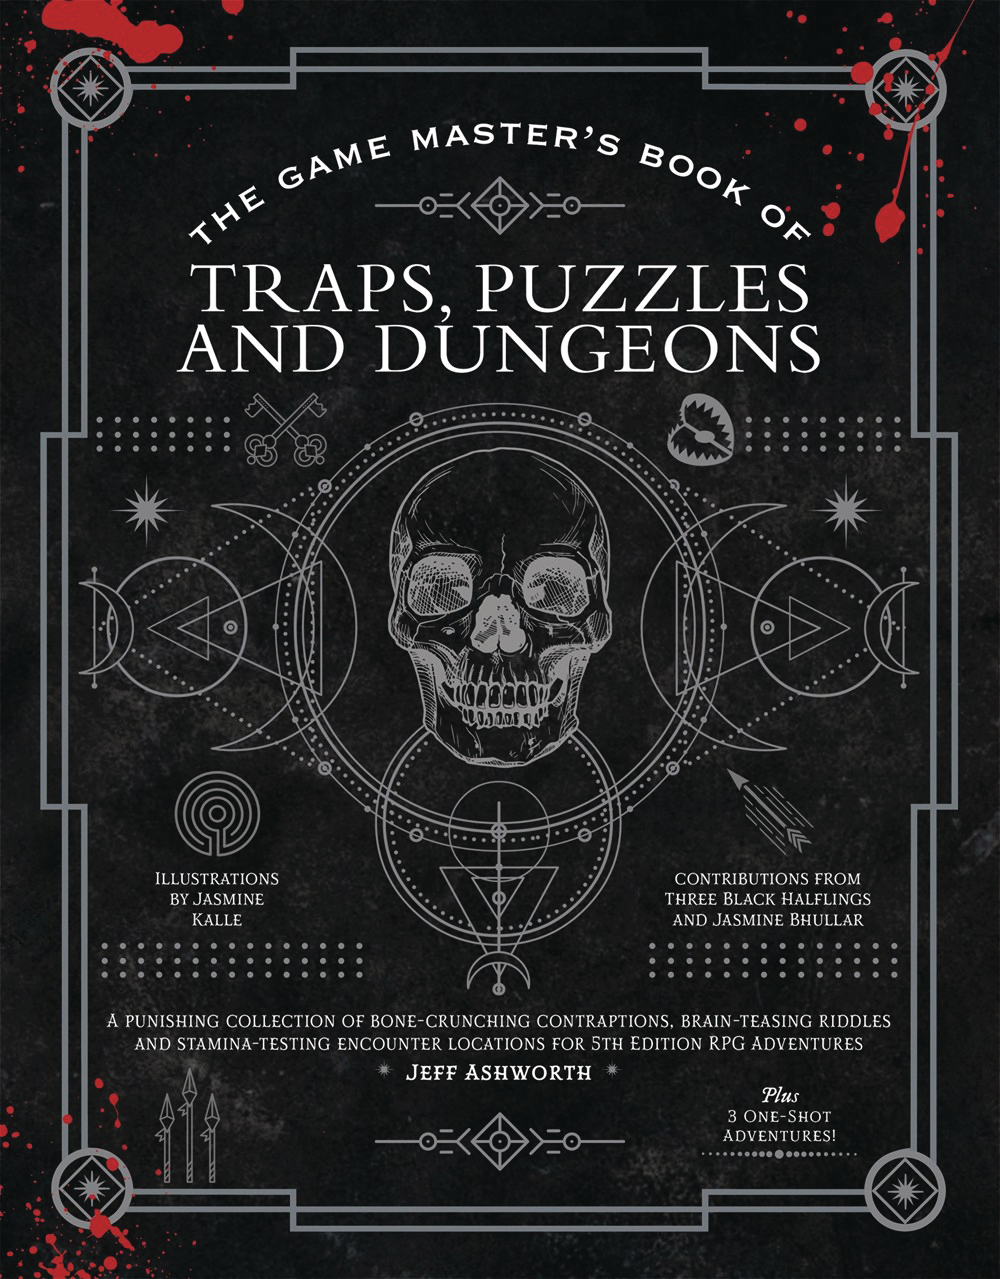 Game Master's Book of Traps, Puzzles And Dungeons